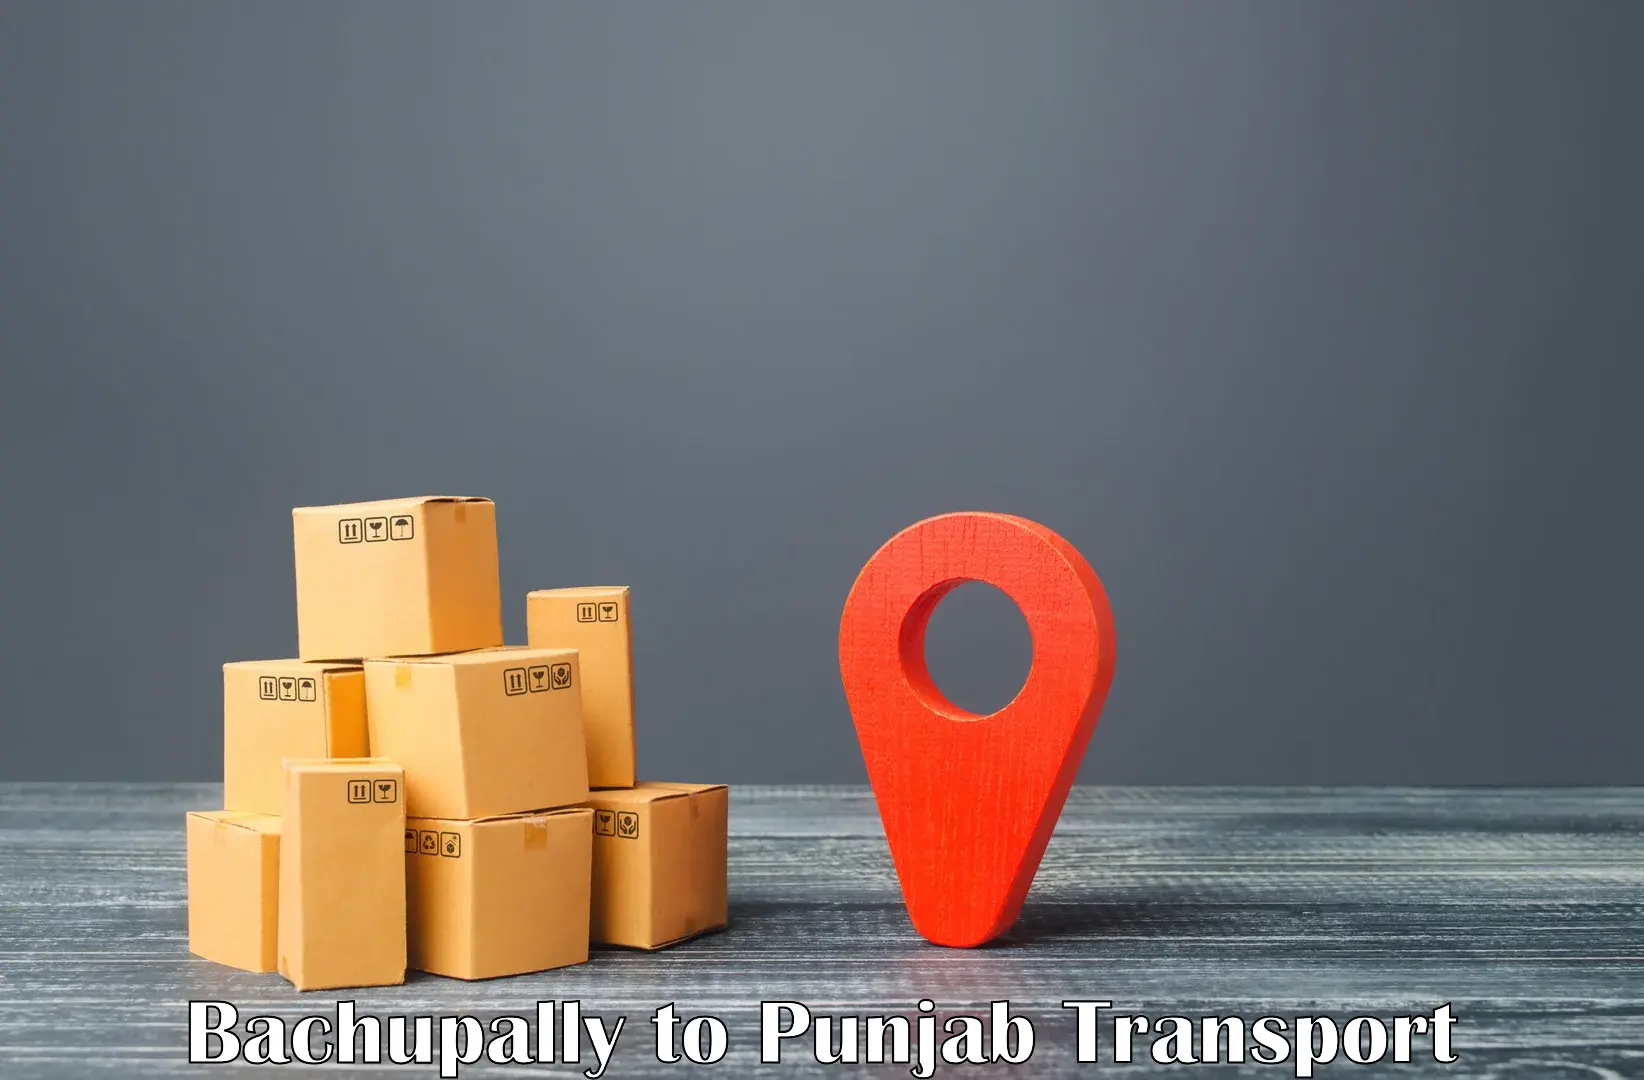 Express transport services in Bachupally to Fazilka